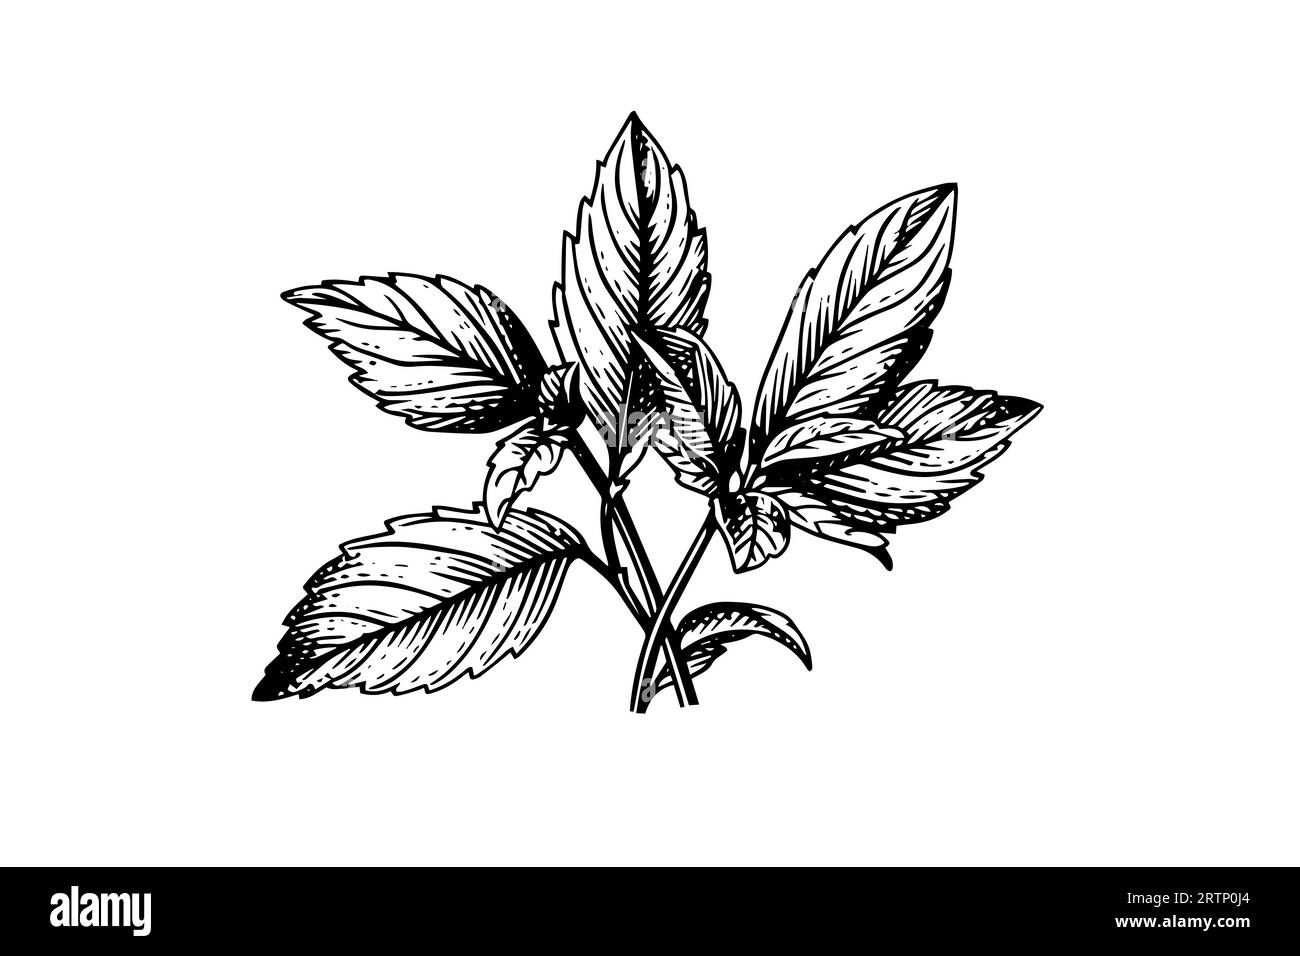 Peppermint sketch. Mint leaves branches and flowers engraving style vector illustration. Stock Vector